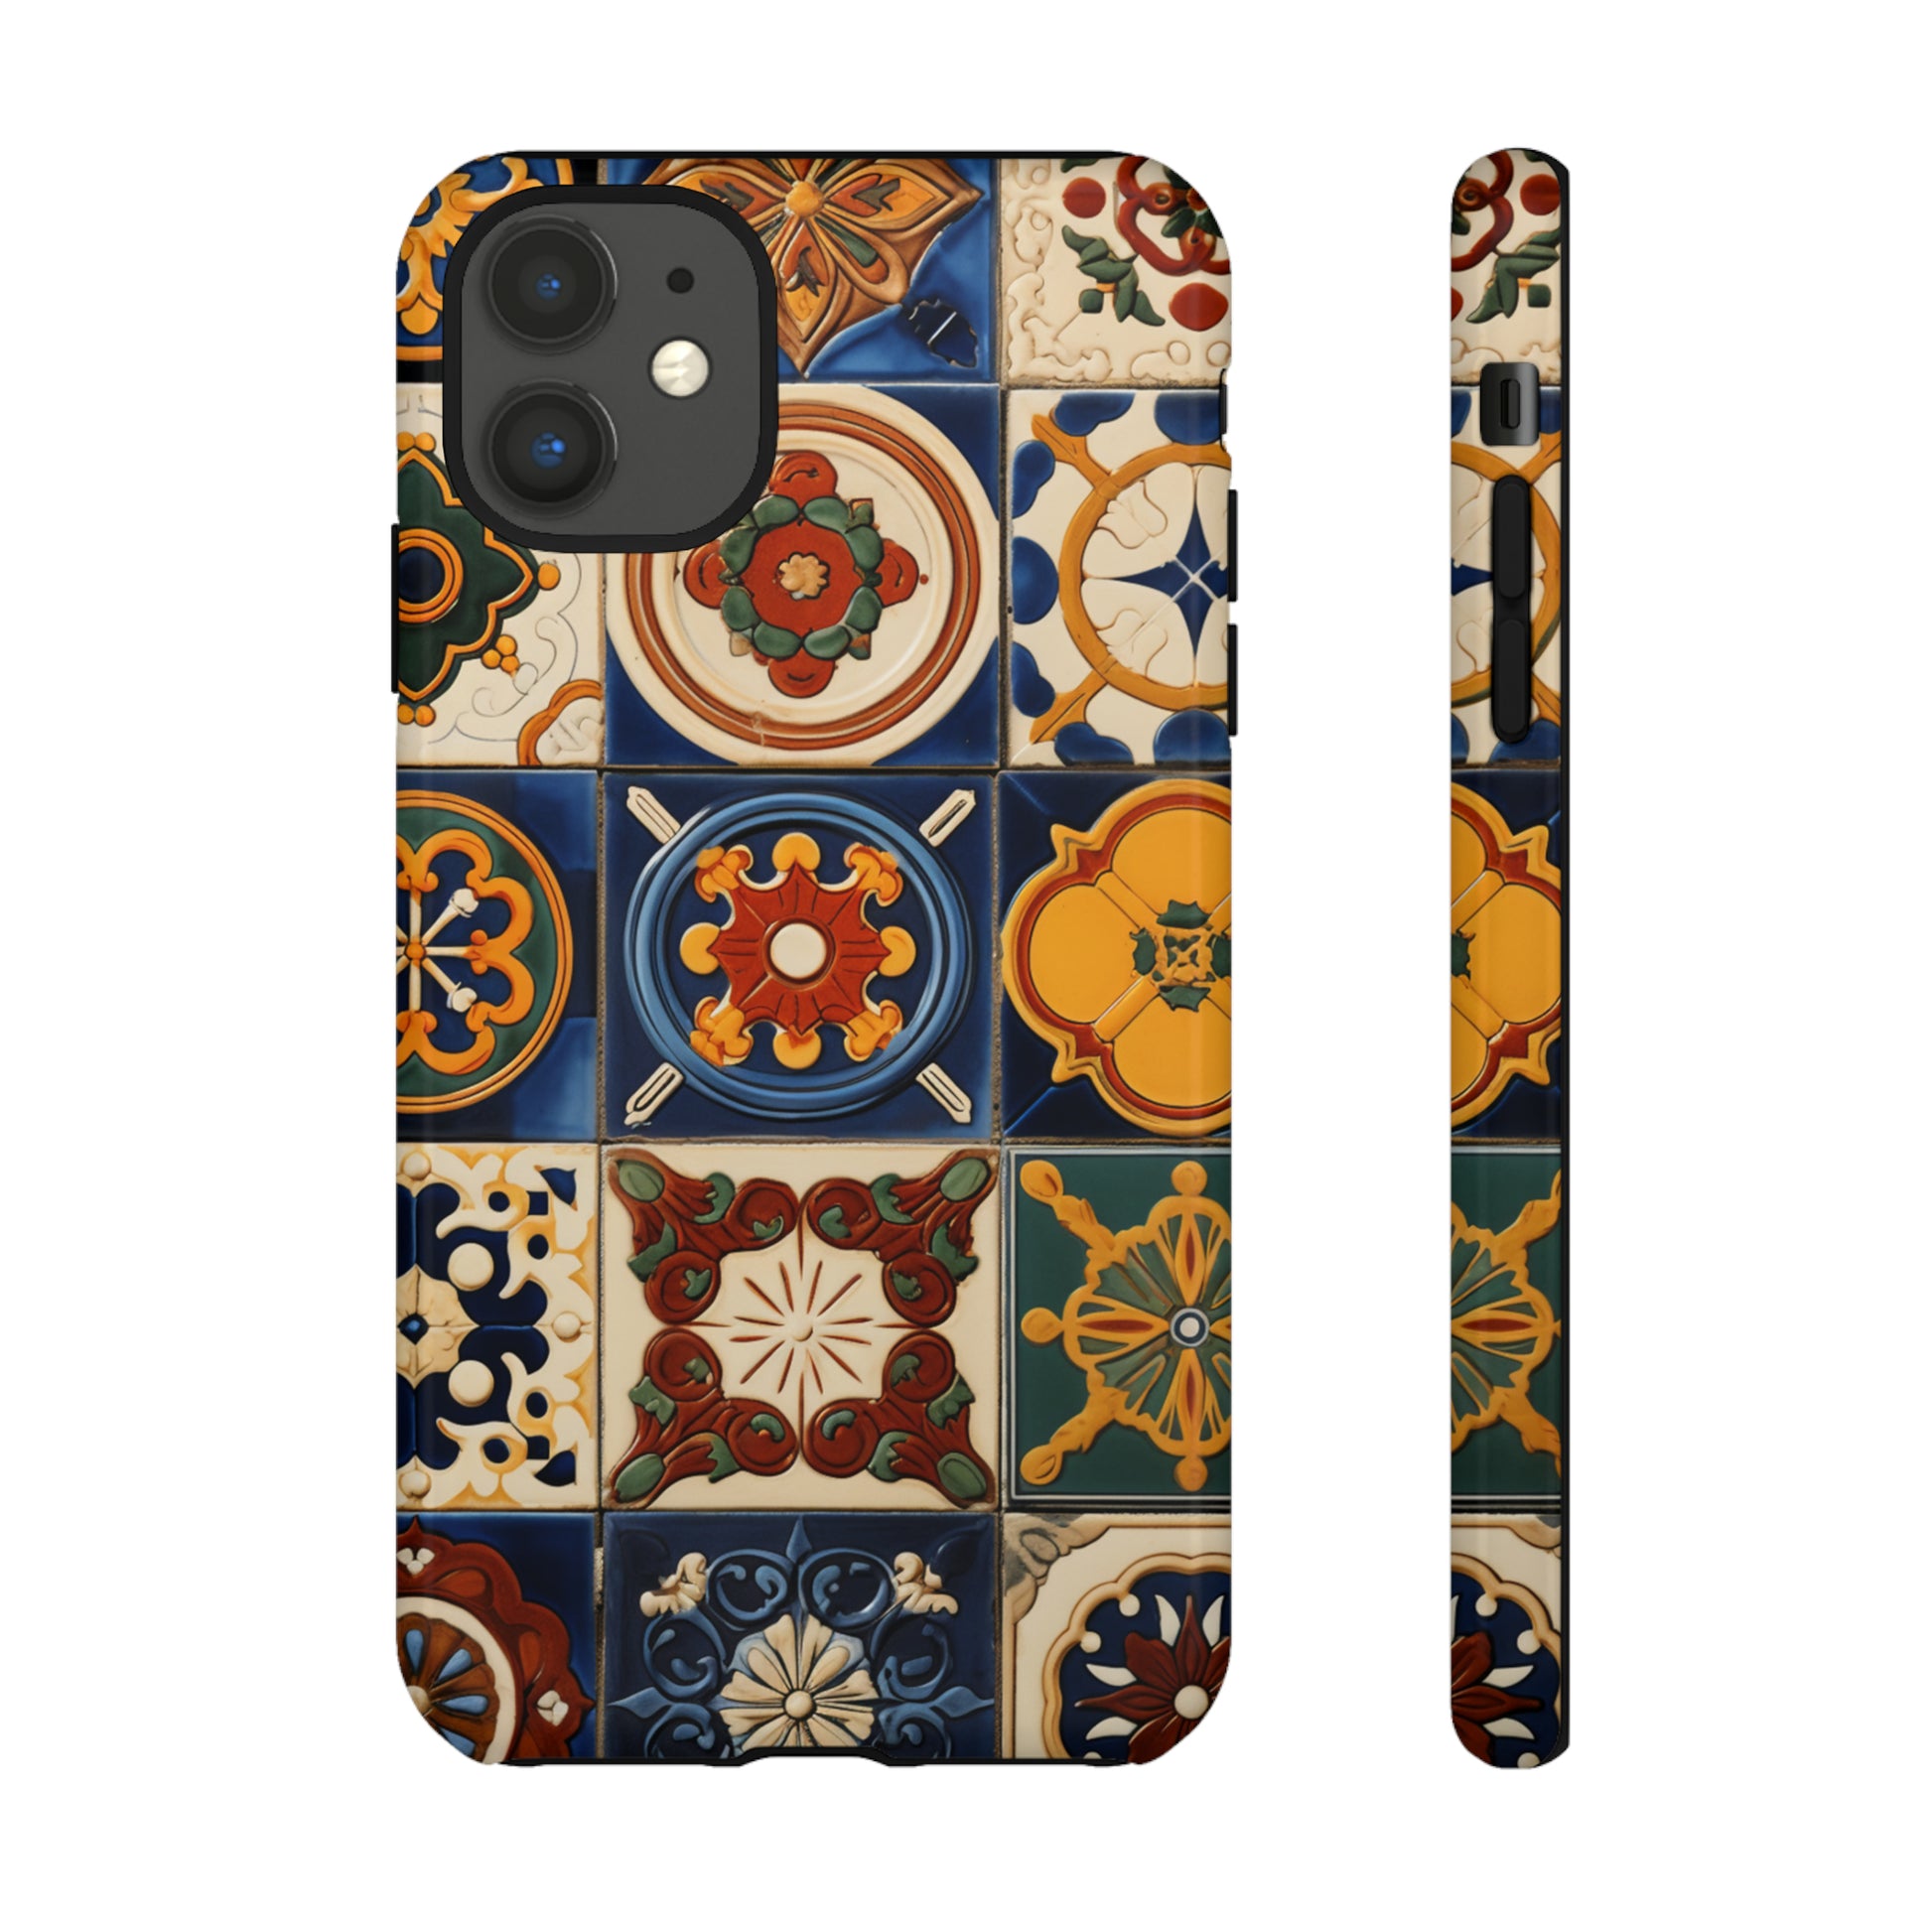 Moroccan culture flair for iPhone 12